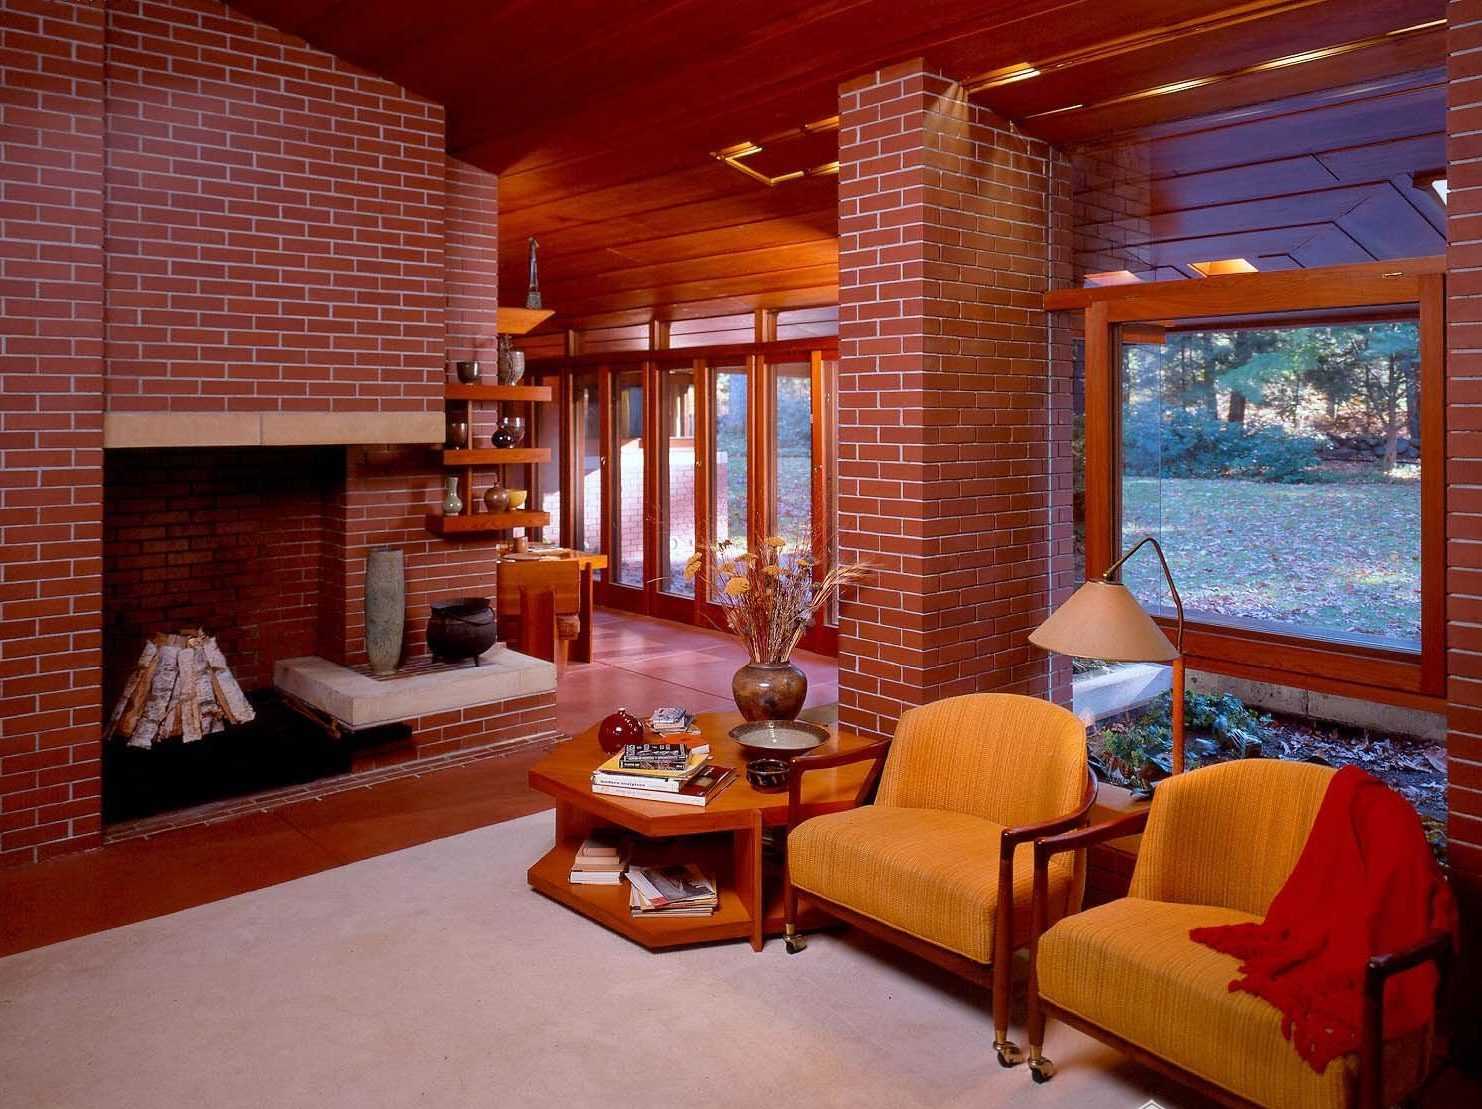 the idea of ​​using a beautiful decorative brick in the design of the living room